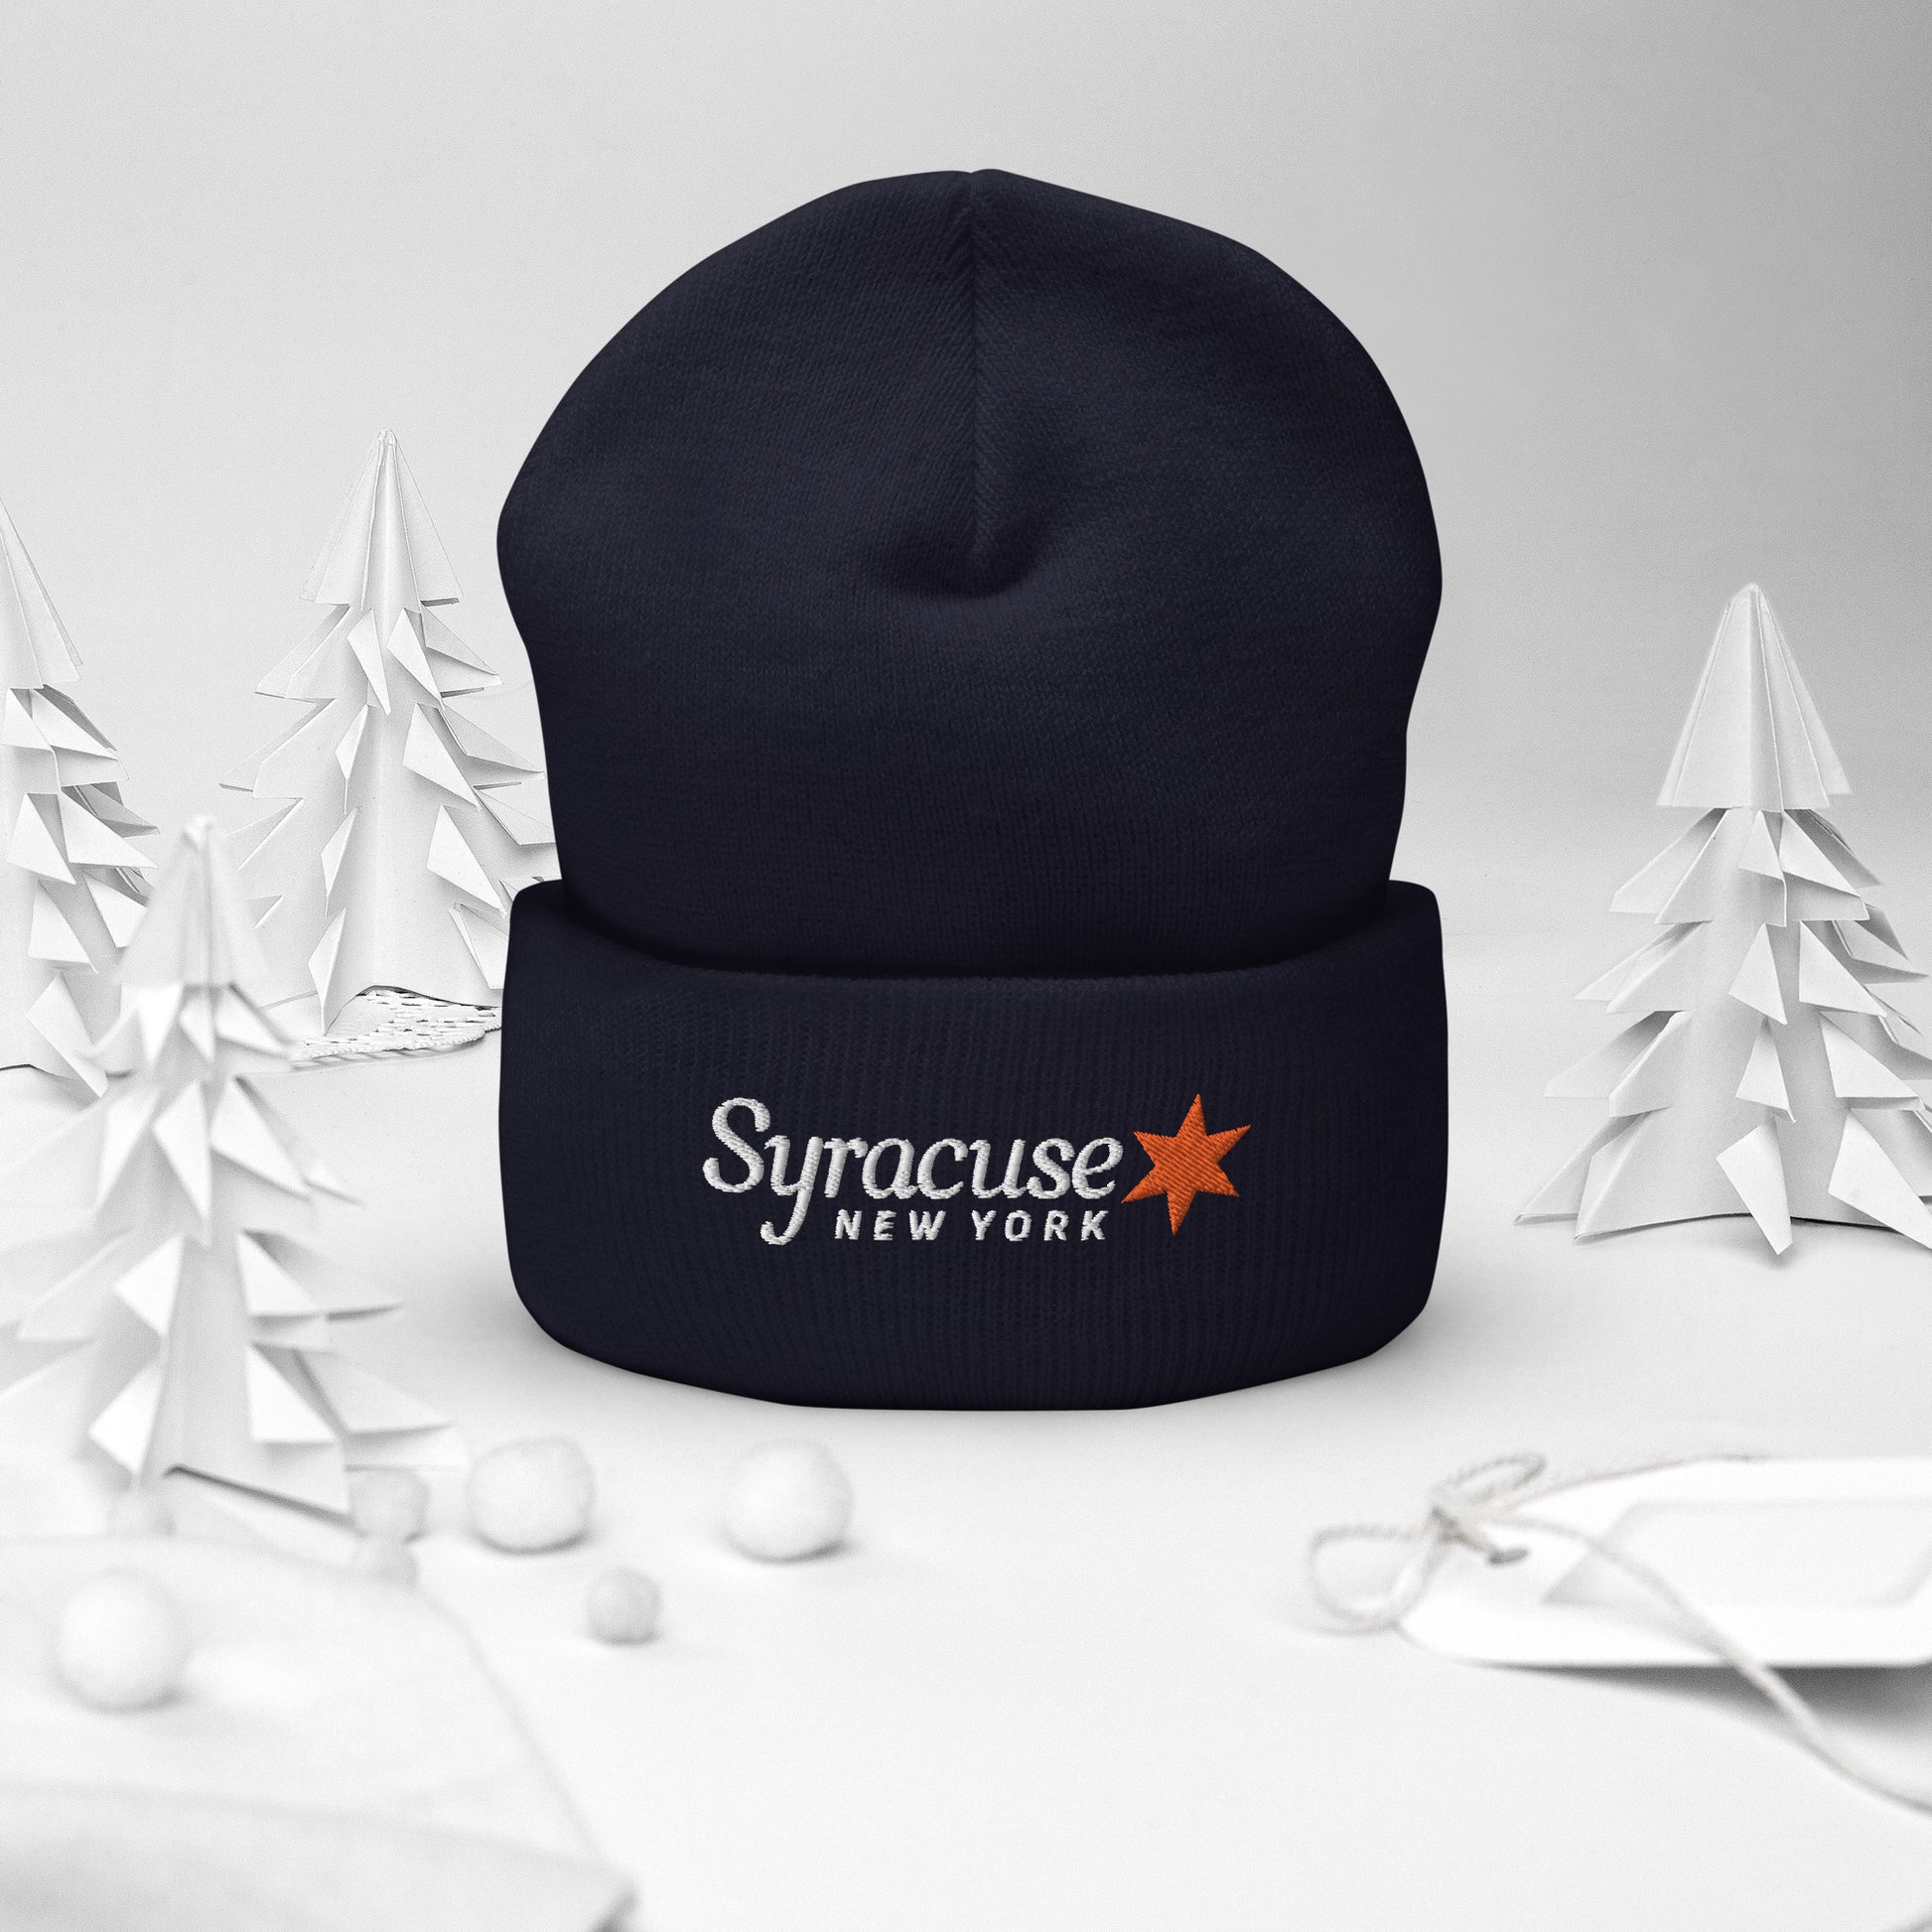 A navy blue Syracuse, NY winter beanie hat embroidered with a Syracuse, NY logo standing upright on a decorative holiday background